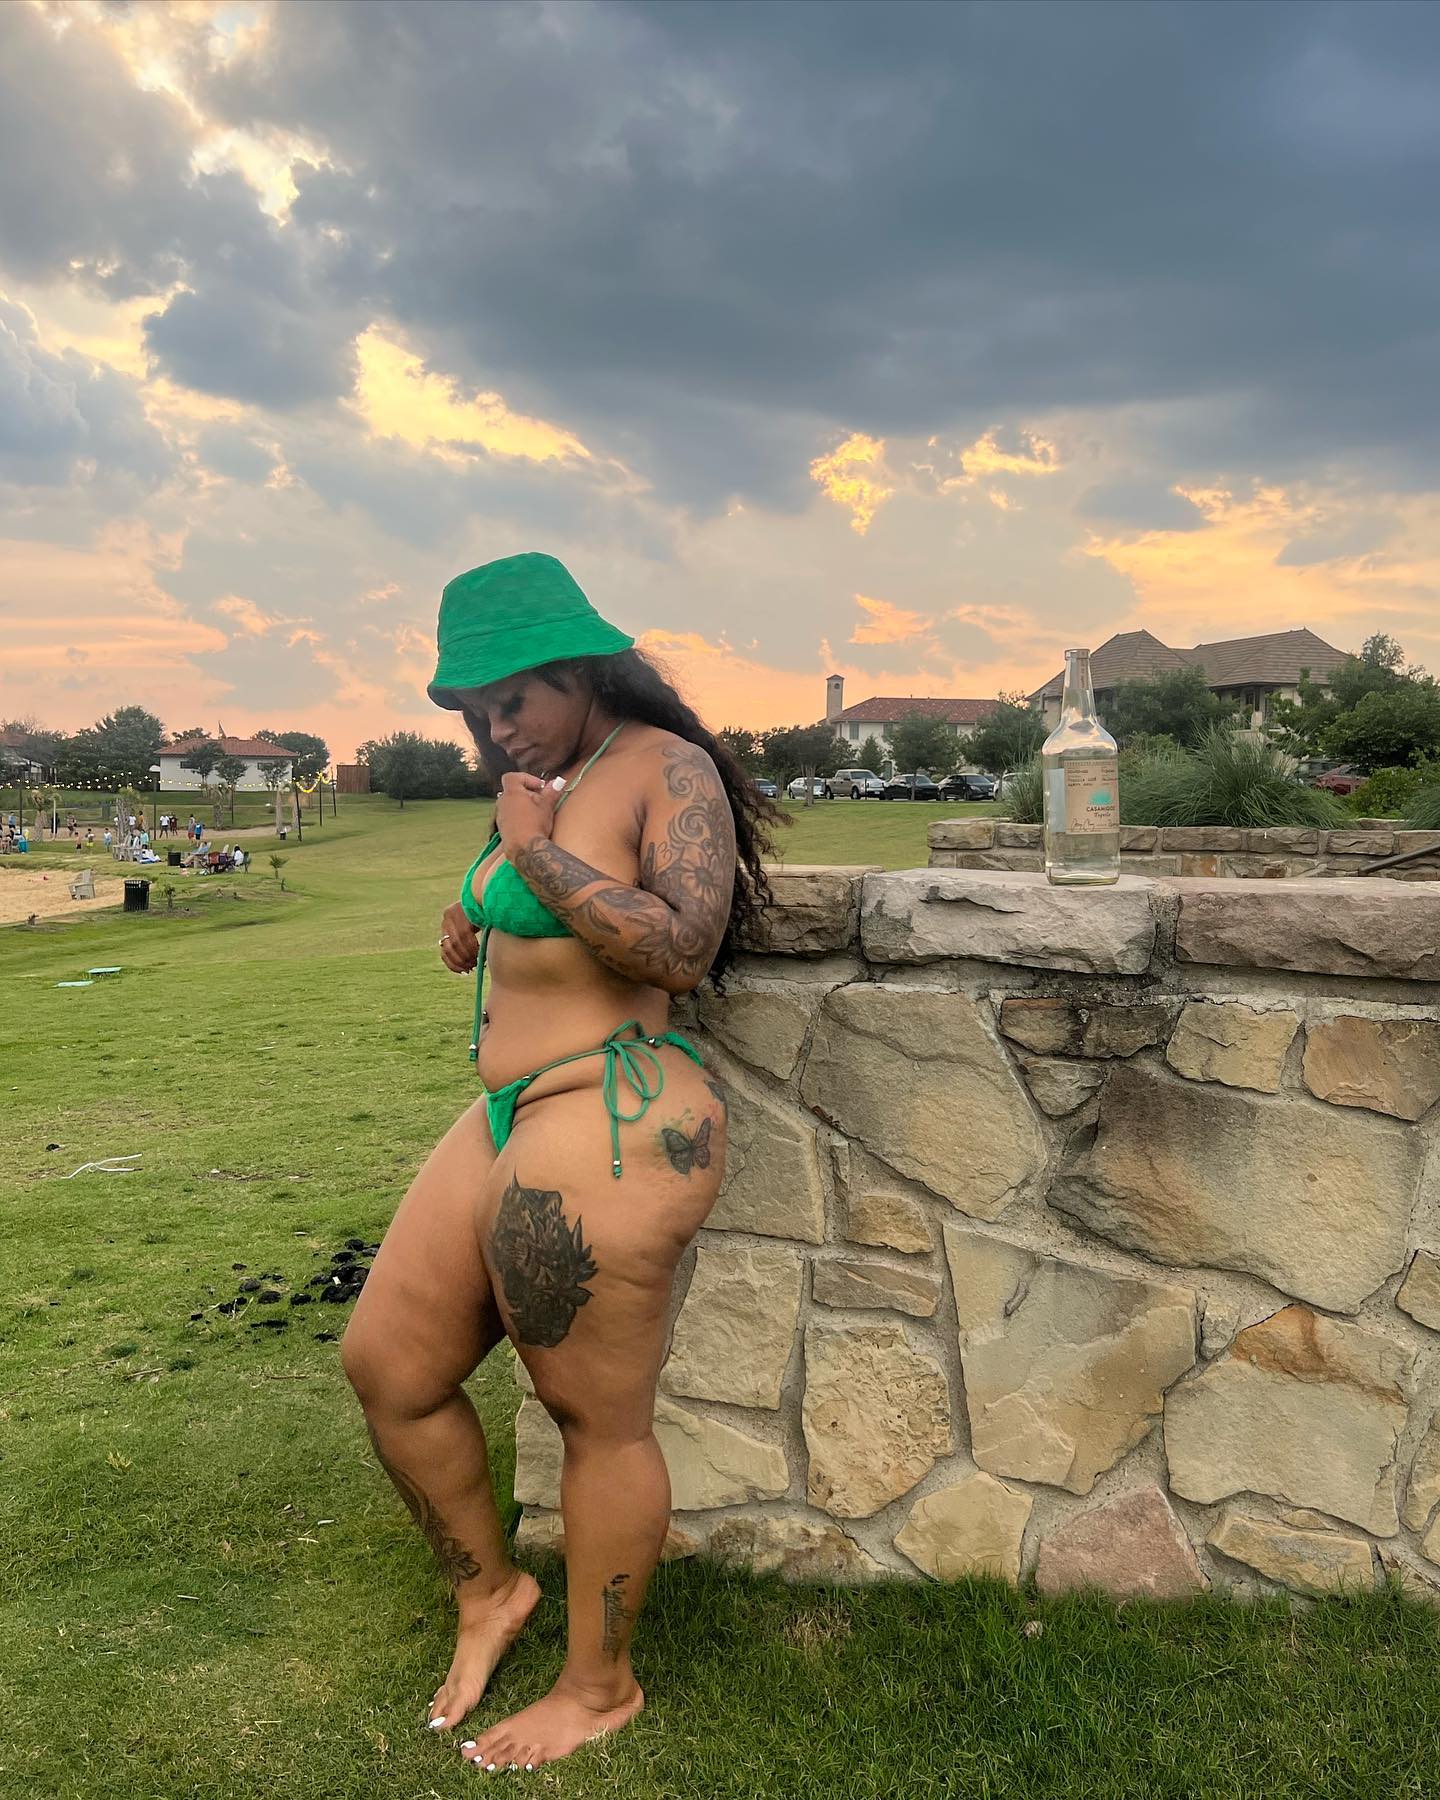 Hard to forget but here’s a reminder 💚🐐 

Swimsuit👙 @xtherealkdoll